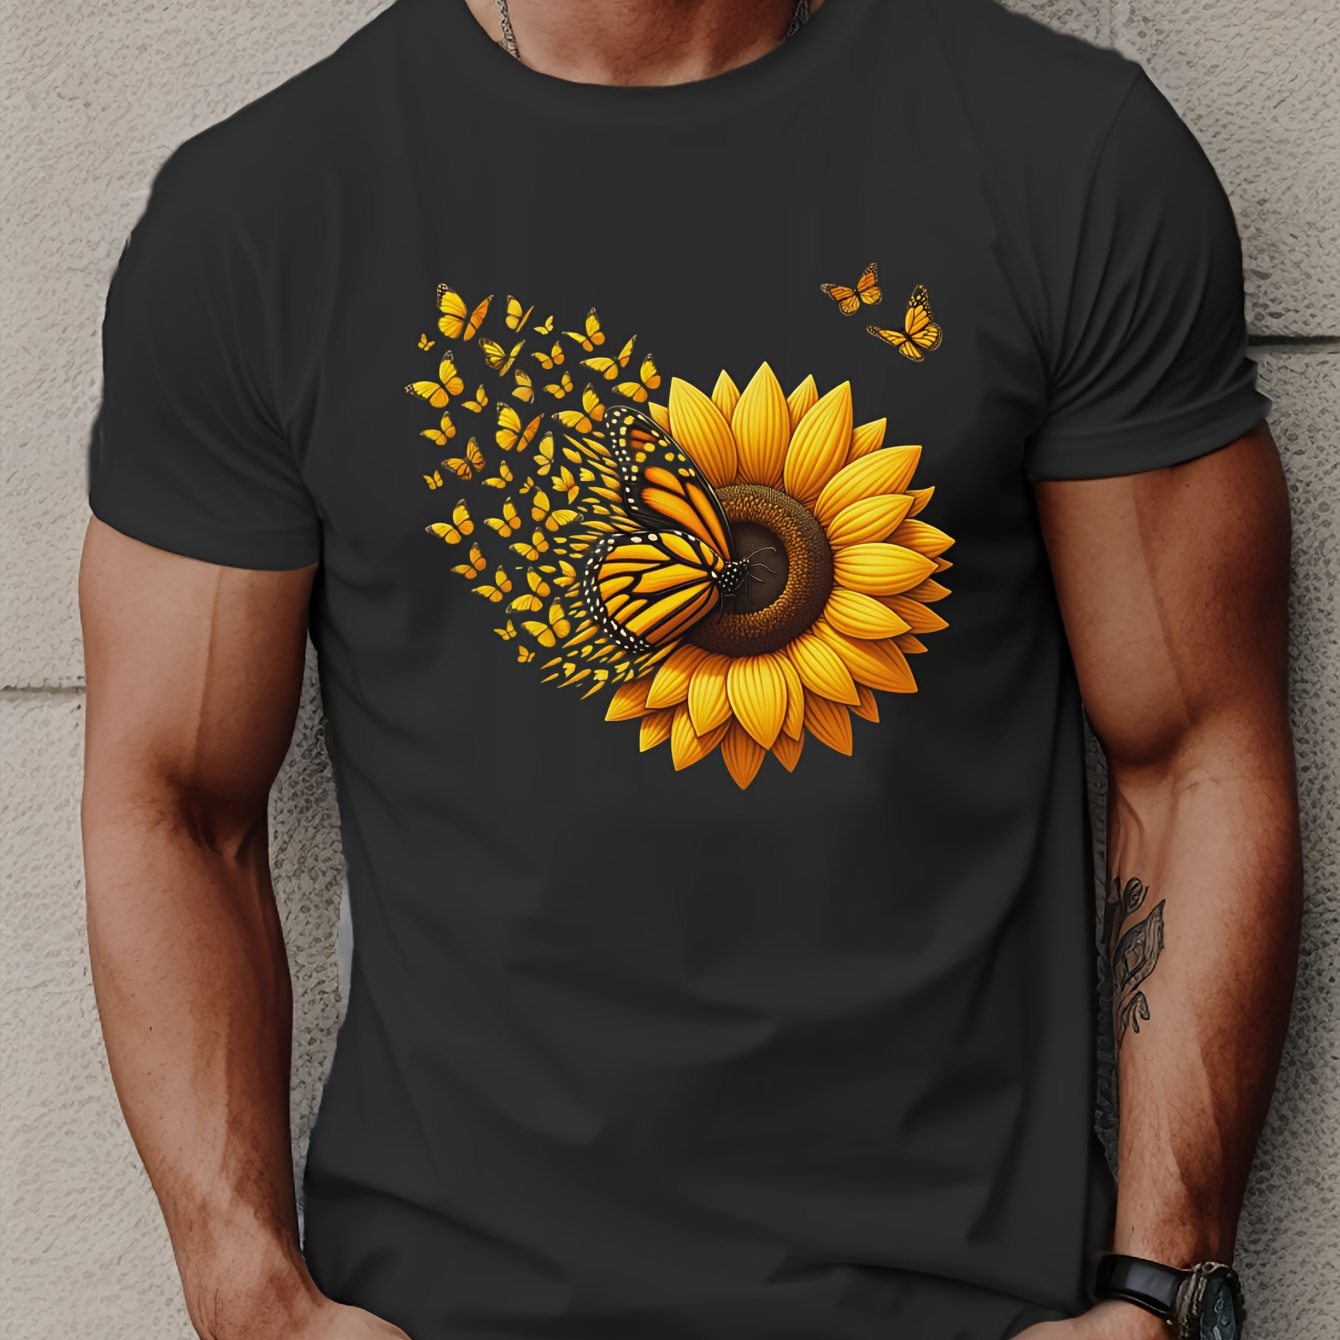 

Innovative Butterfly Sunflower Print Short Sleeved T-shirt, Casual Comfy Versatile Tee Top, Men's Everyday Spring/summer Clothing